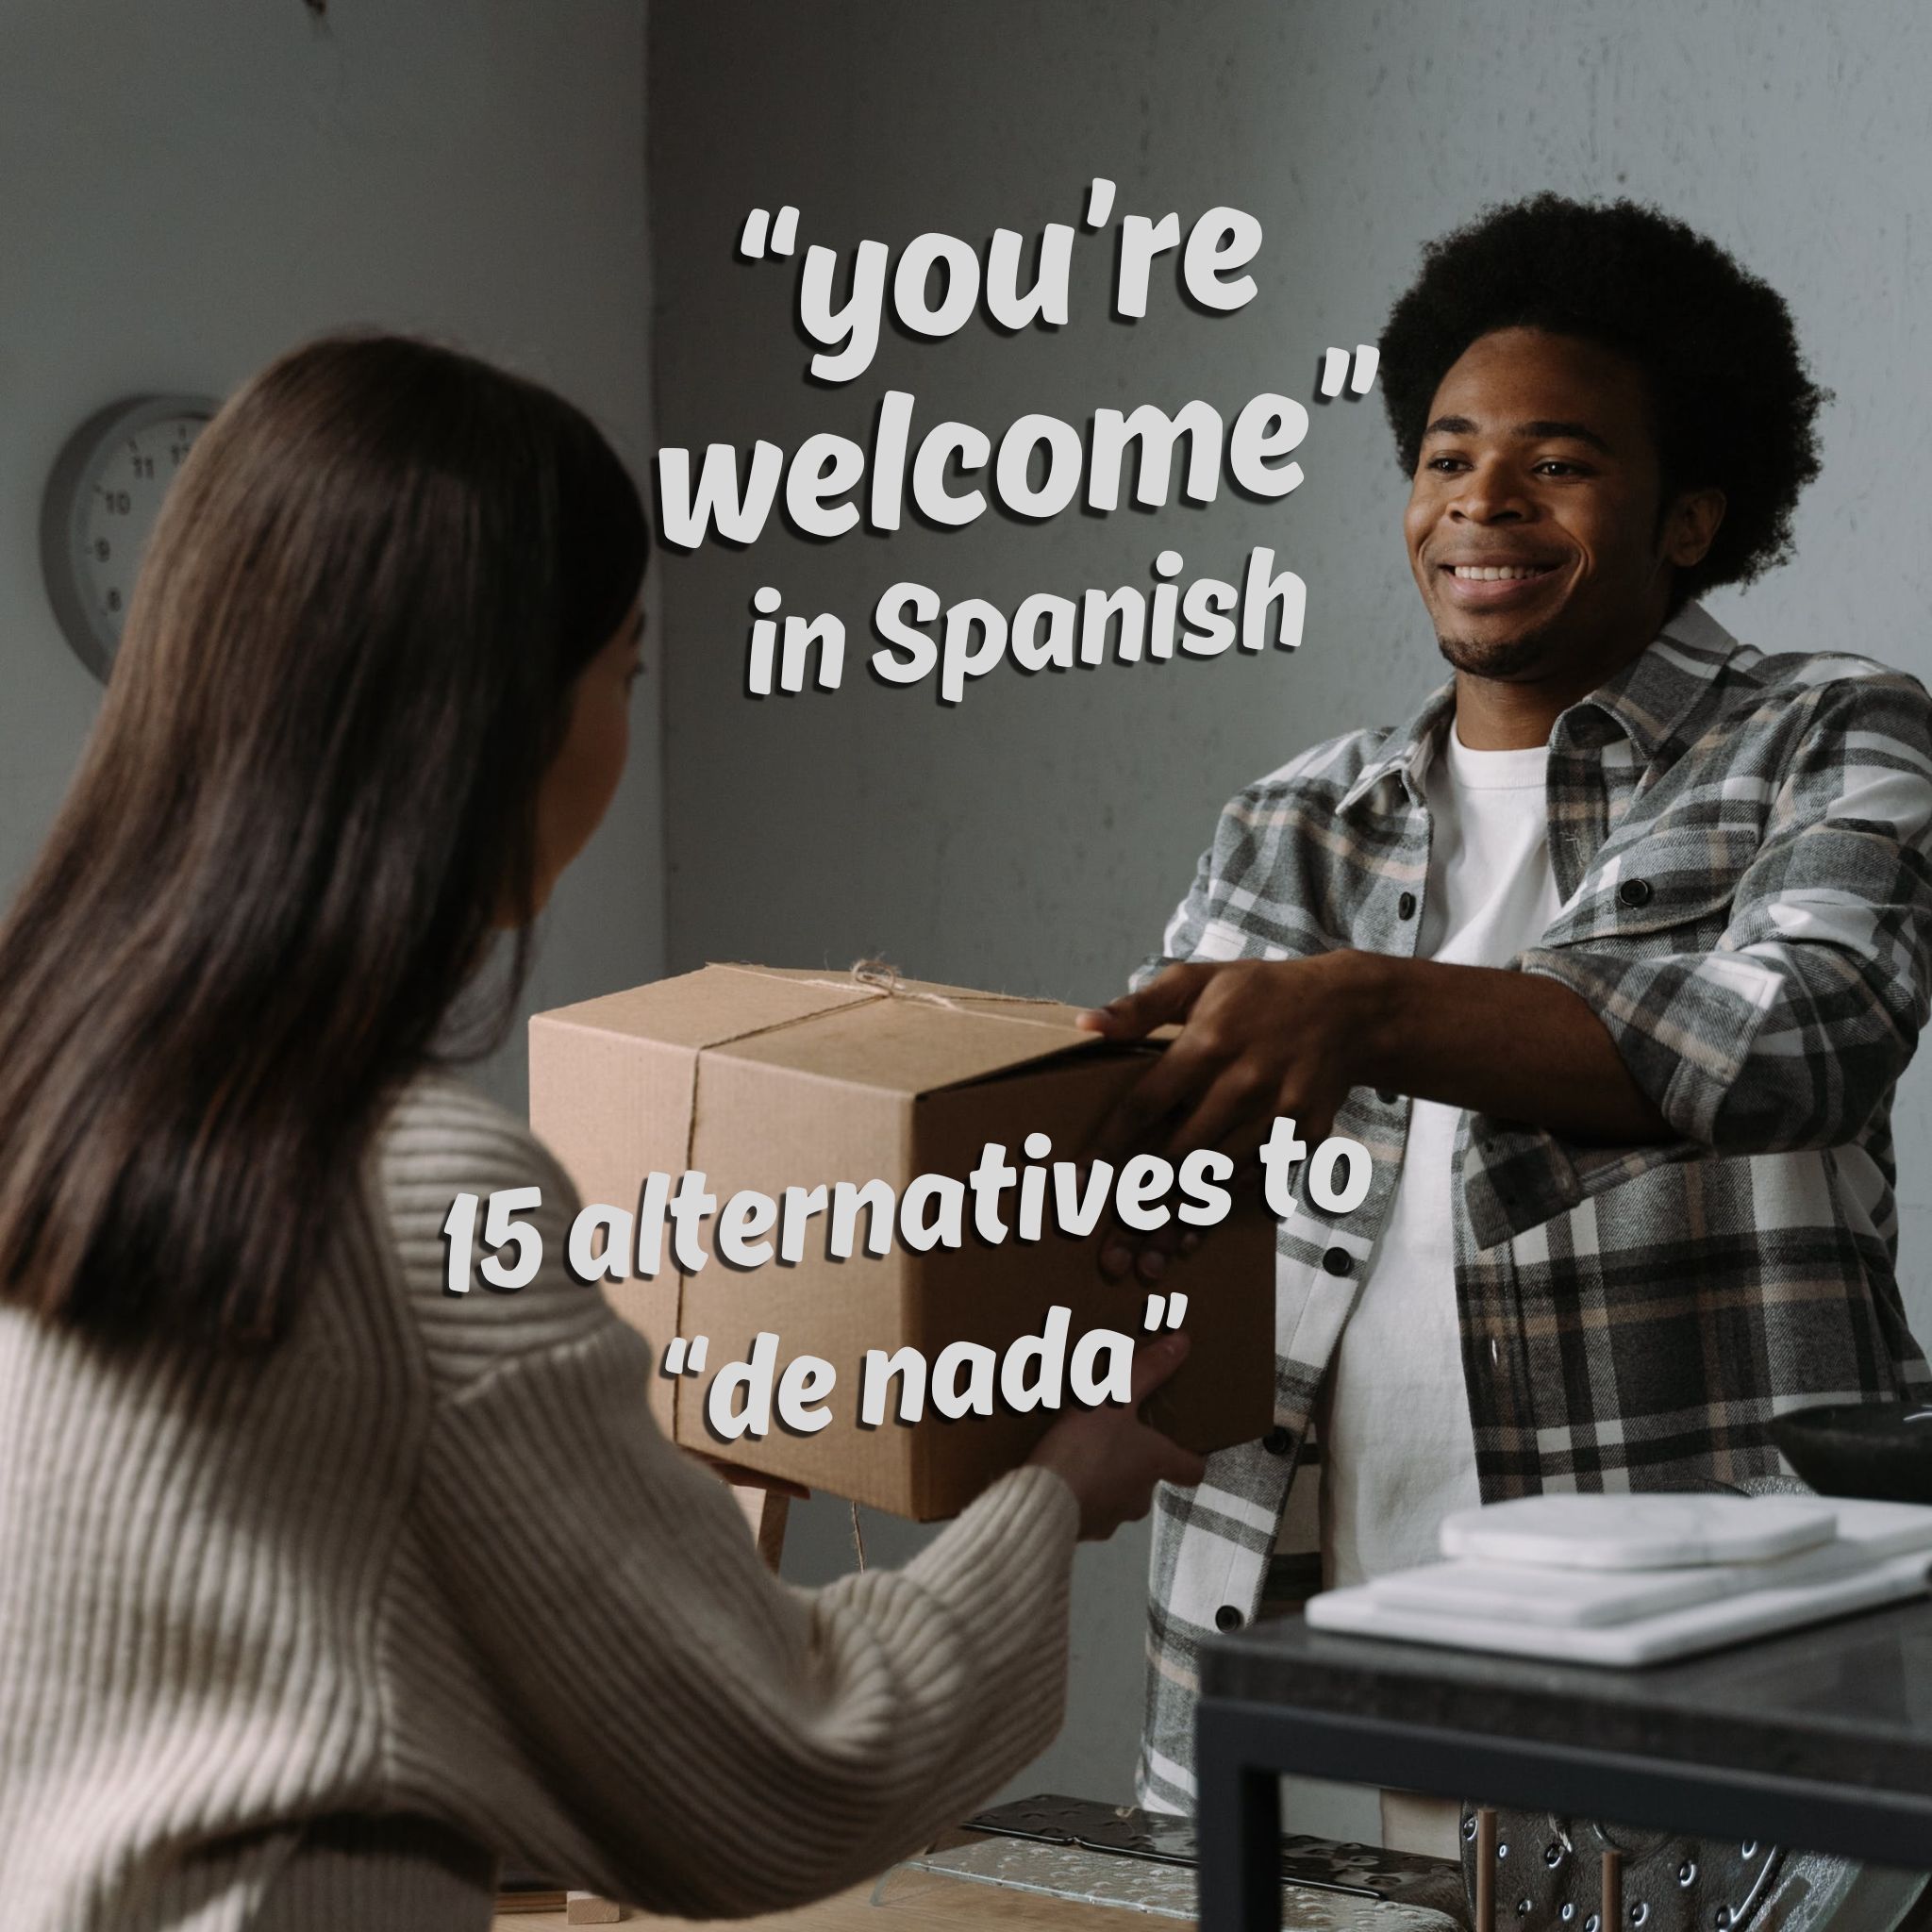 translate de nada from spanish to english